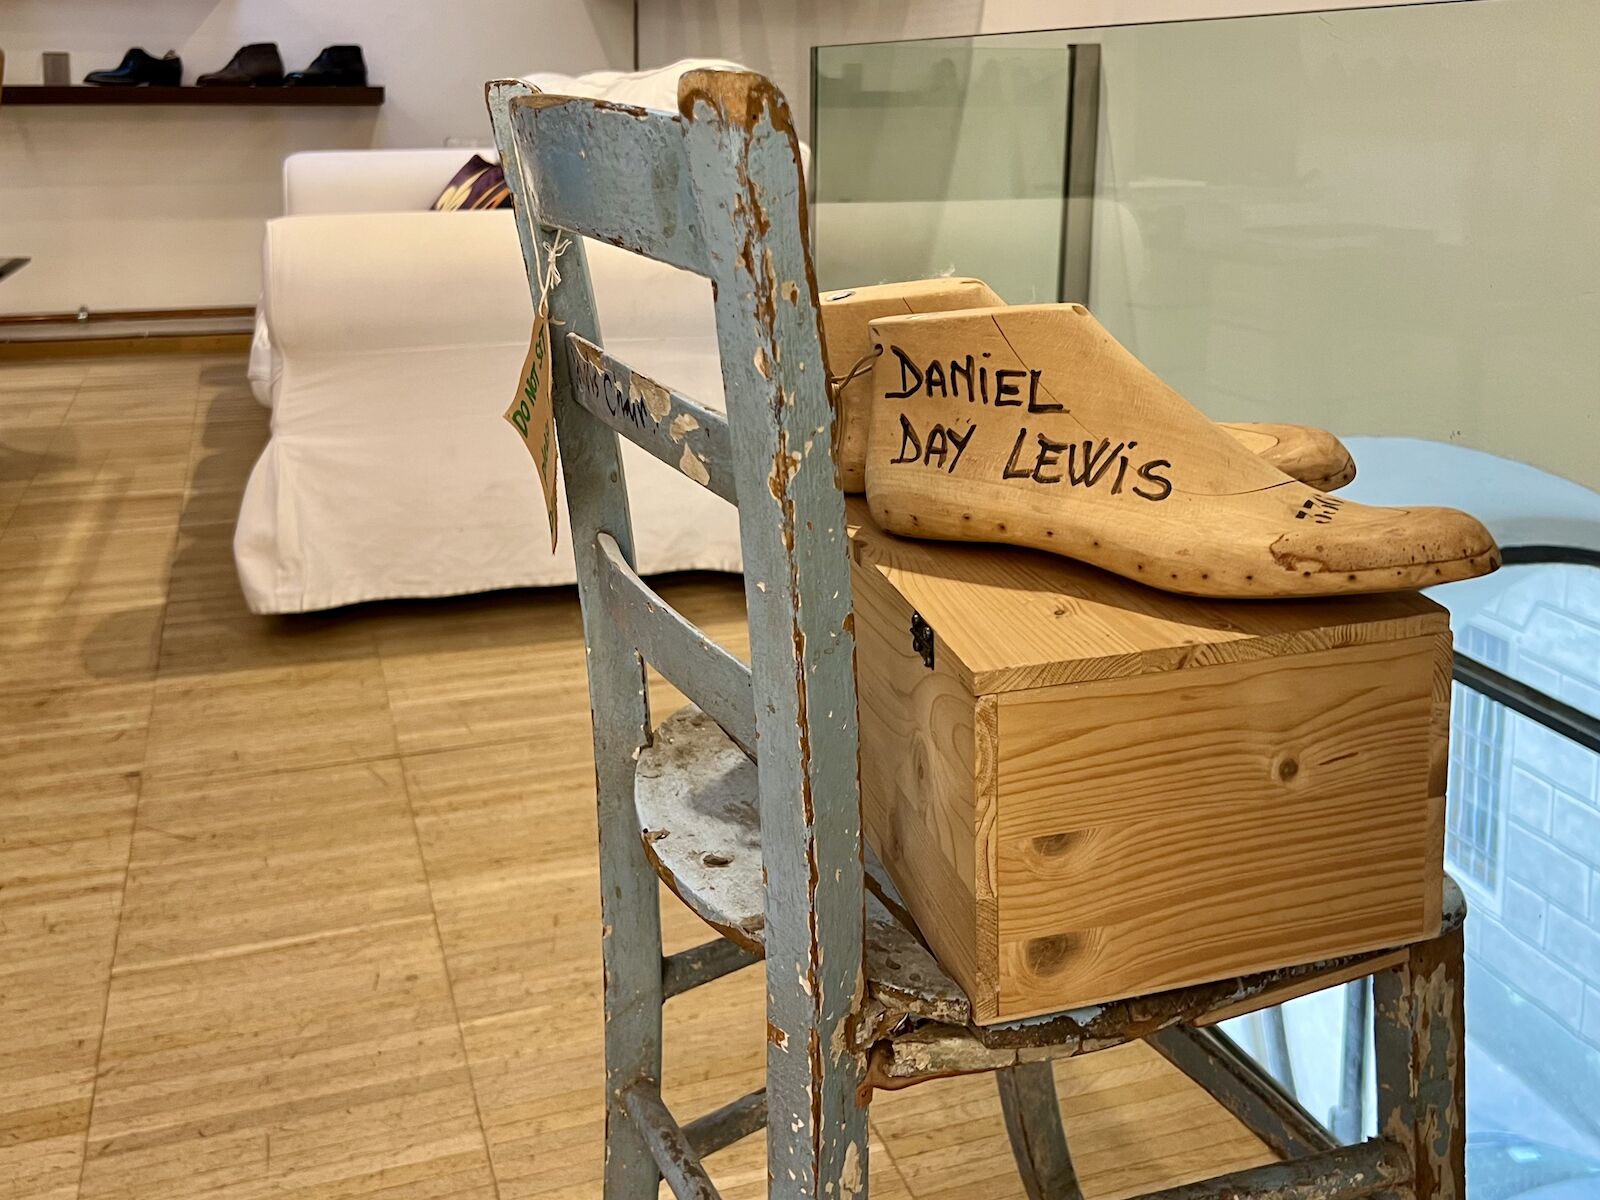 daniel day lewis chair and shoe mold in florence